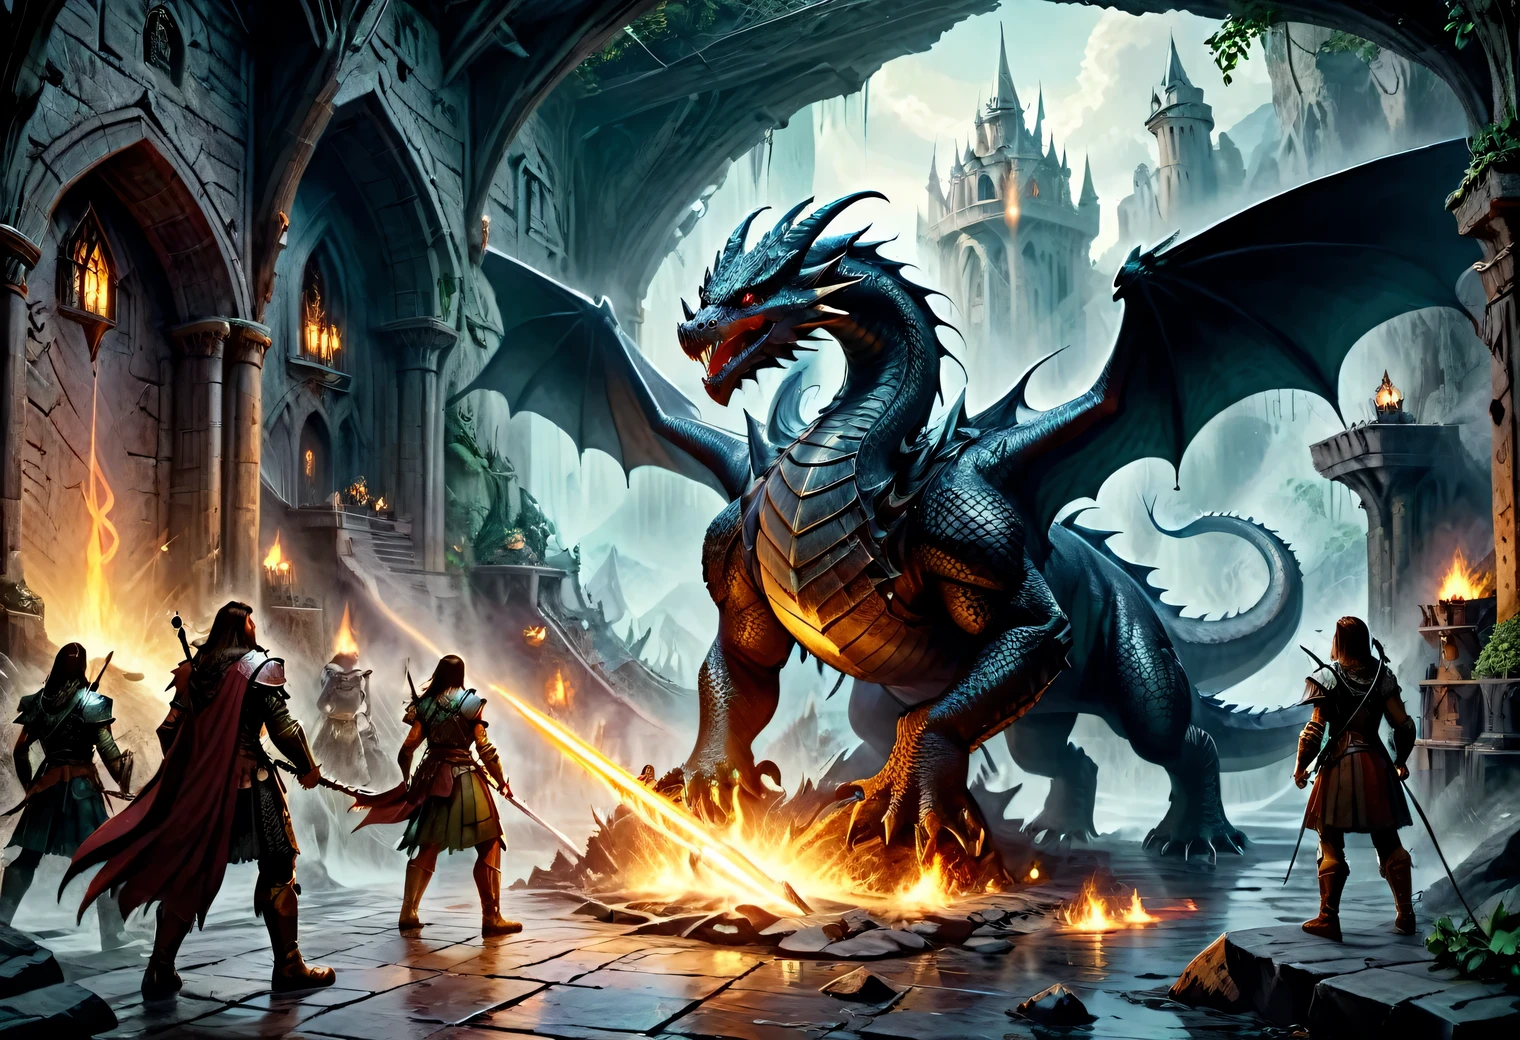 Dungeons and Dragons, a real story based on the game "Dungeons & Dragons", epic, grandiose, dragon and heroes, epic battle, magical artifacts, magic sword, real photography, cinematic frame, active scene, digital frame processing, computer graphics effects, digital art, masterpiece, real, valid, existing where-that's in another world